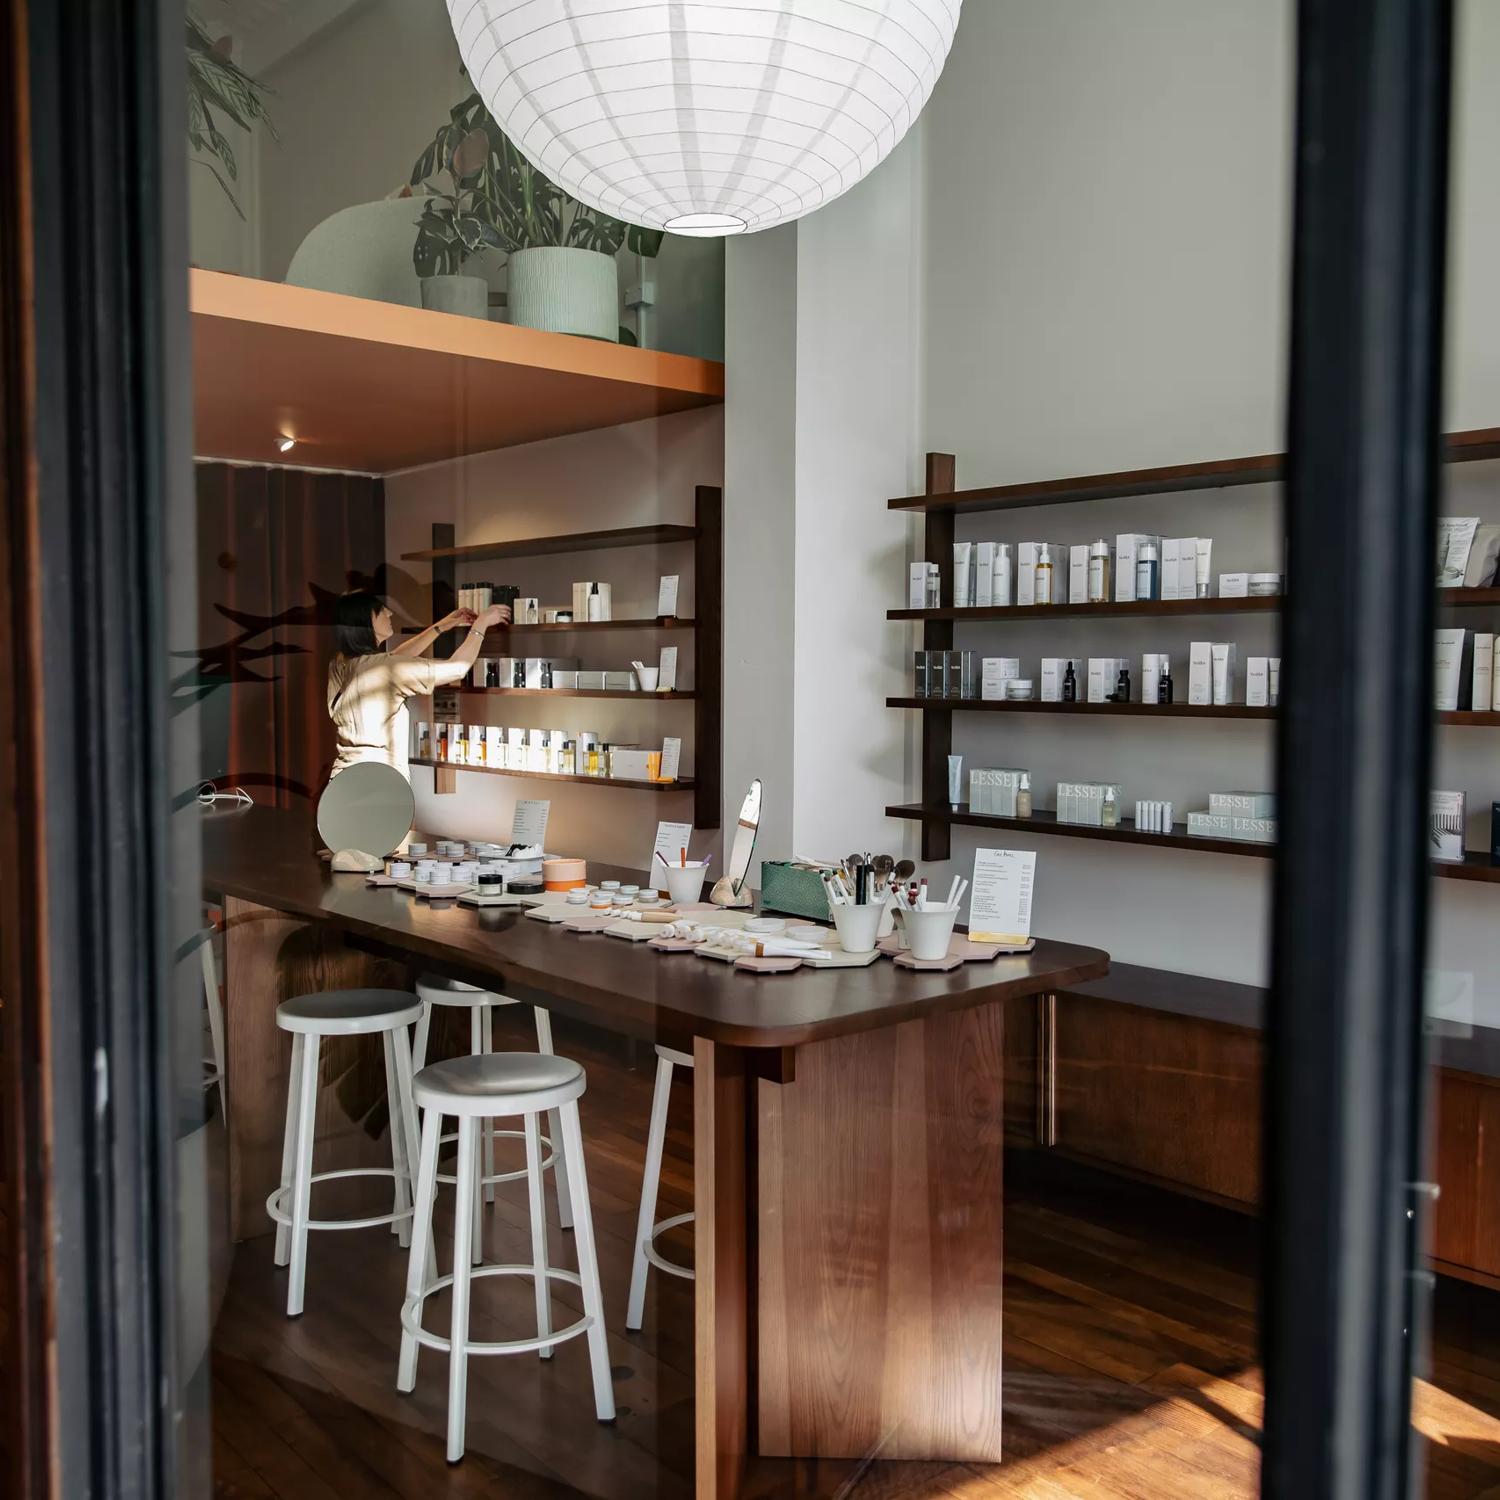 Looking into Iris Store + Studio adorned with their beauty products in white bottles on shelves along the wall and a counter in the centre.